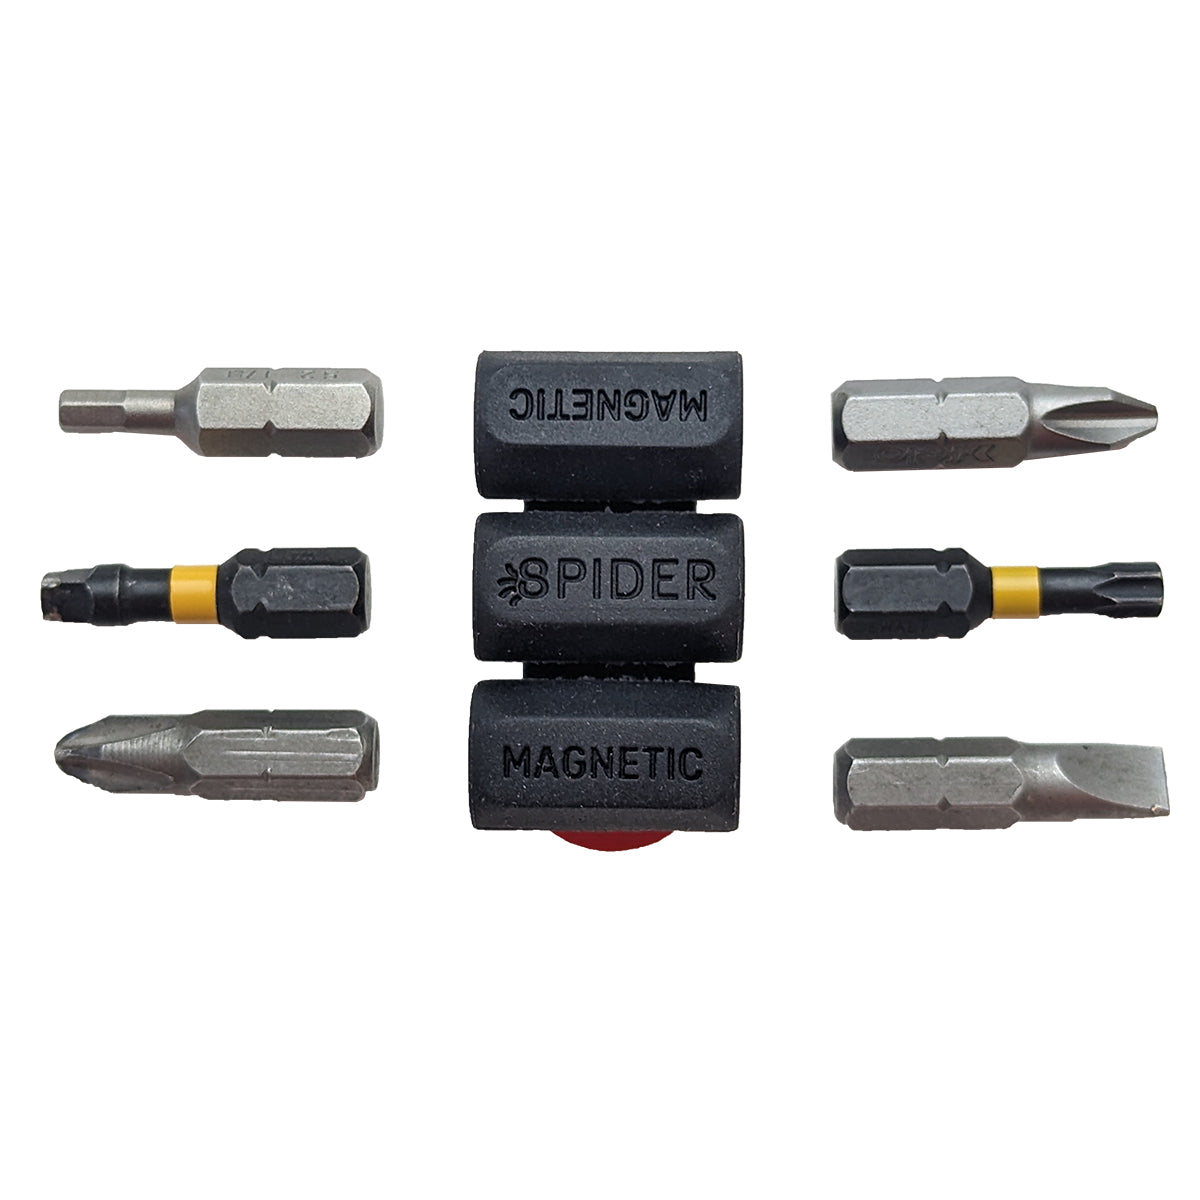 5122TH: Magnetic BitGripper - Pack of 3